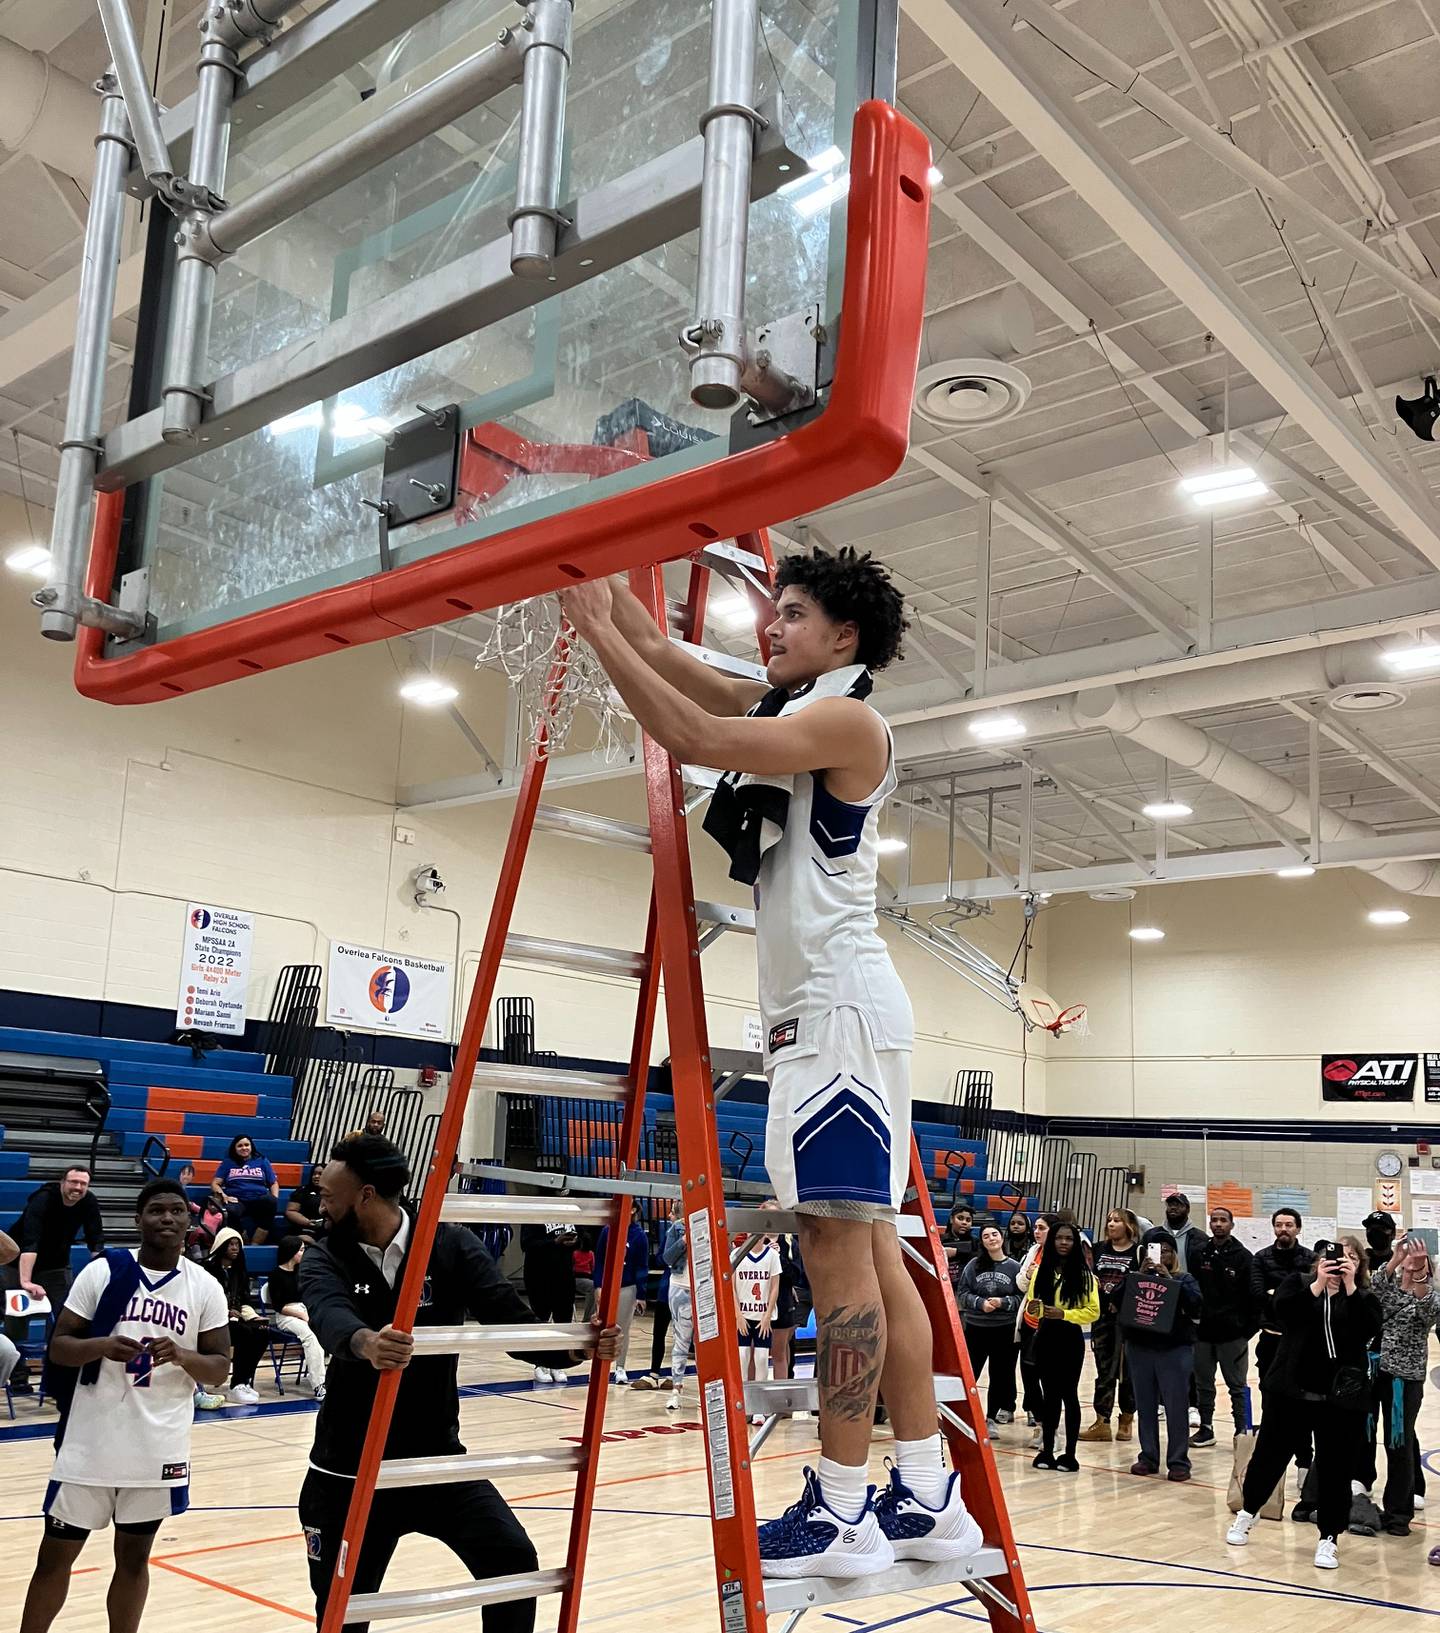 Overlea's Tjay Backles cuts down some of the basketball net after Thursday's Class 2A North Region 2 championship game. Backles scored 11 of his 23 points in the final quarter as the Falcons top Carver Vo-Tech to advance to Saturday's state quarterfinals.